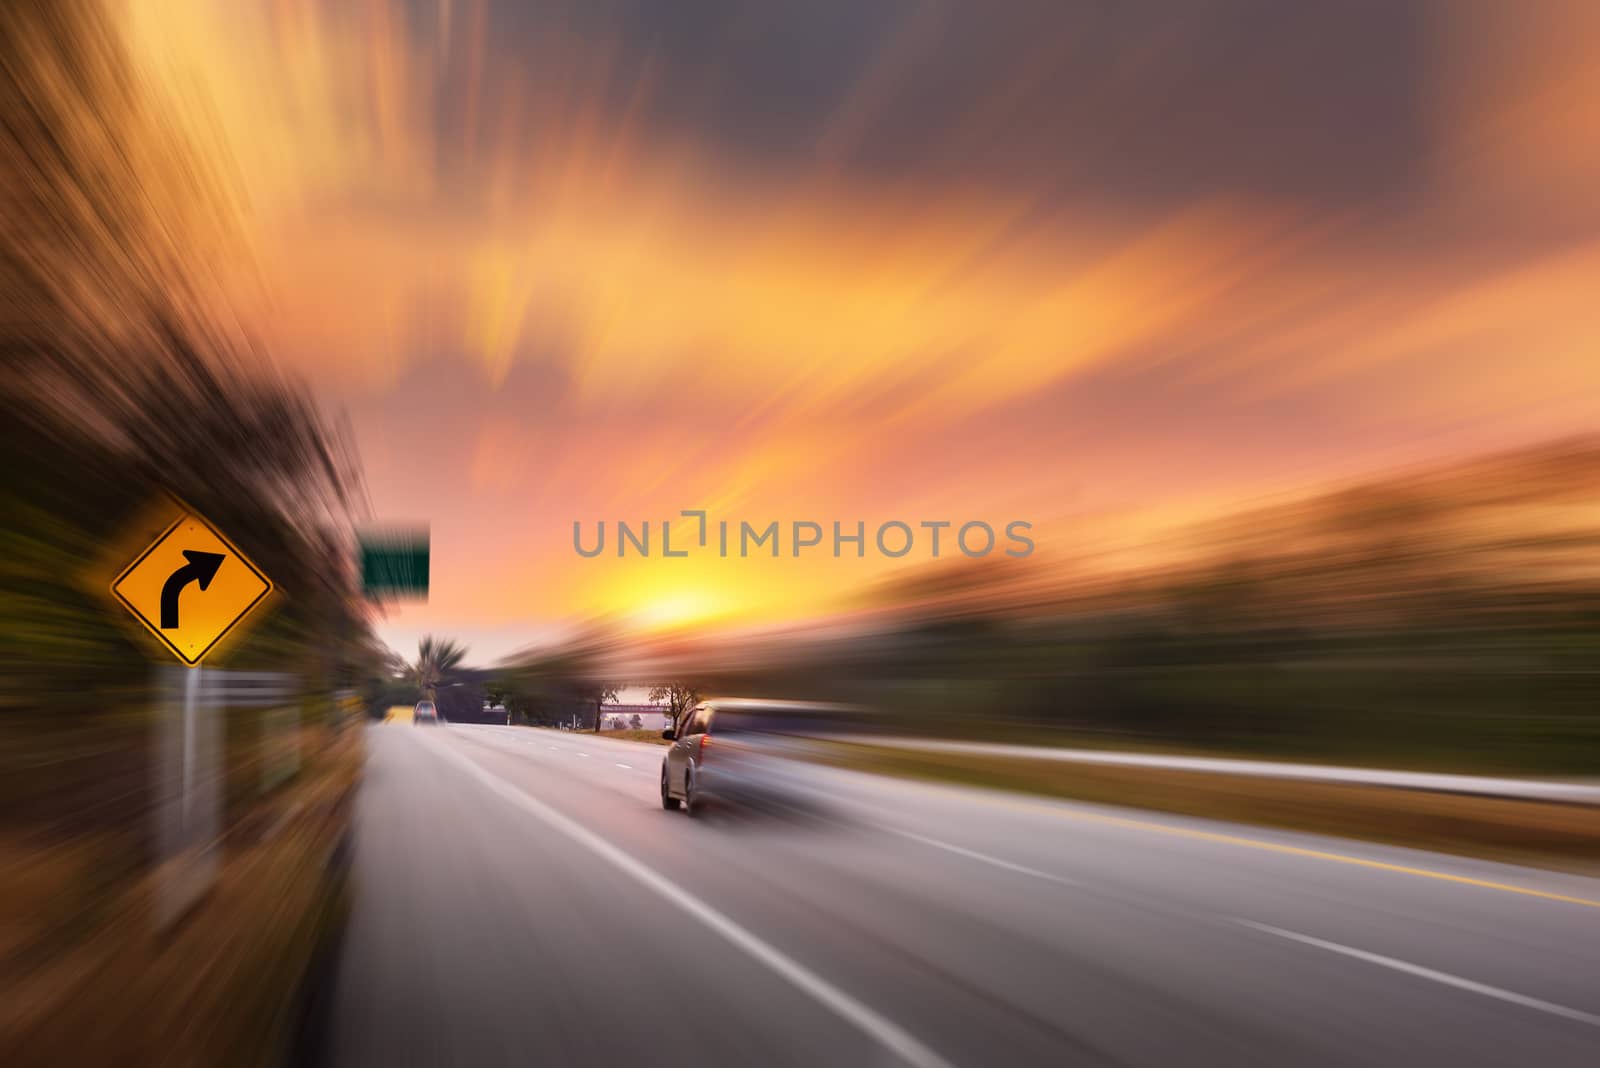 Motion Movement of Vehicle Car in Transportation Mode on Traffic Road, Motions Blur of Automotive While Speed Moving on Motorway During Sunset Scene. Transport Car Driving and Safety concept